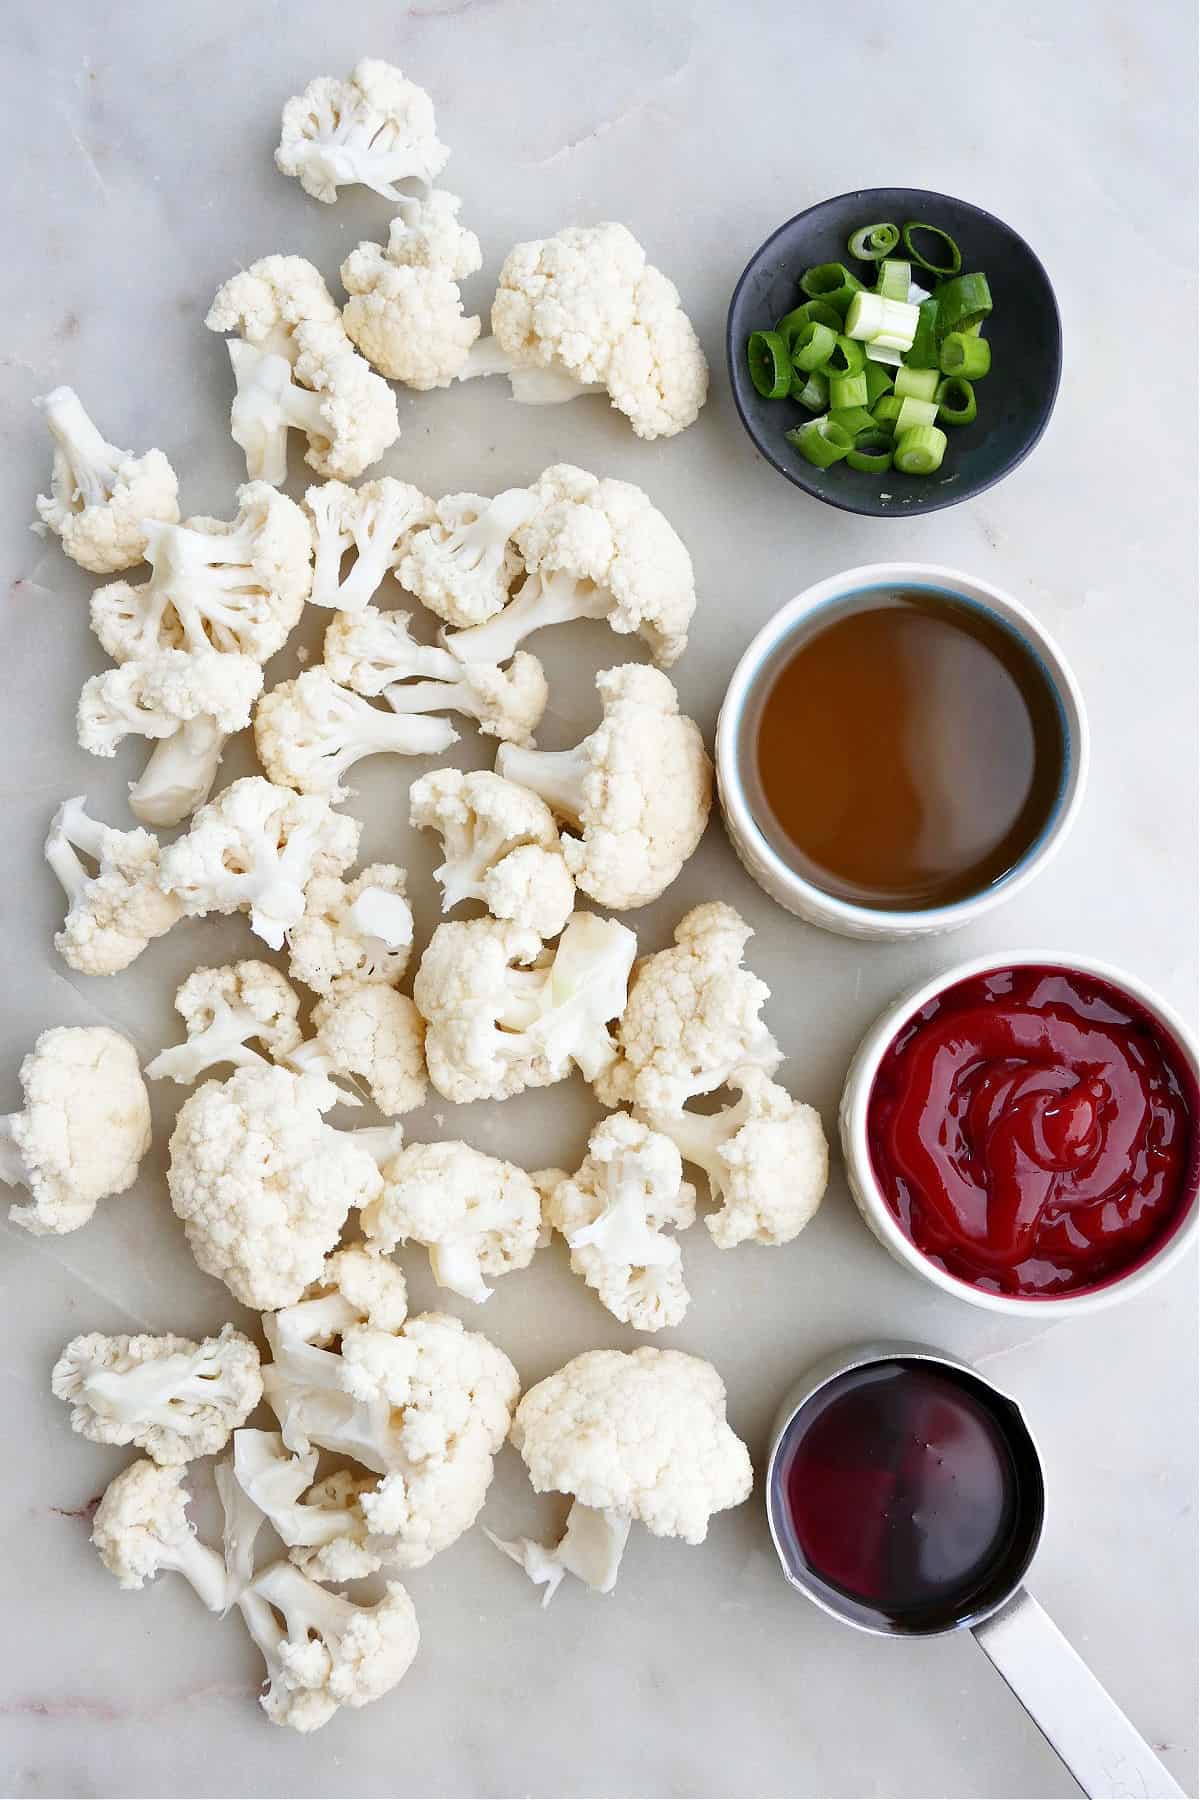 cauliflower florets next to ingredients for sweet and sour sauce spread out on a counter